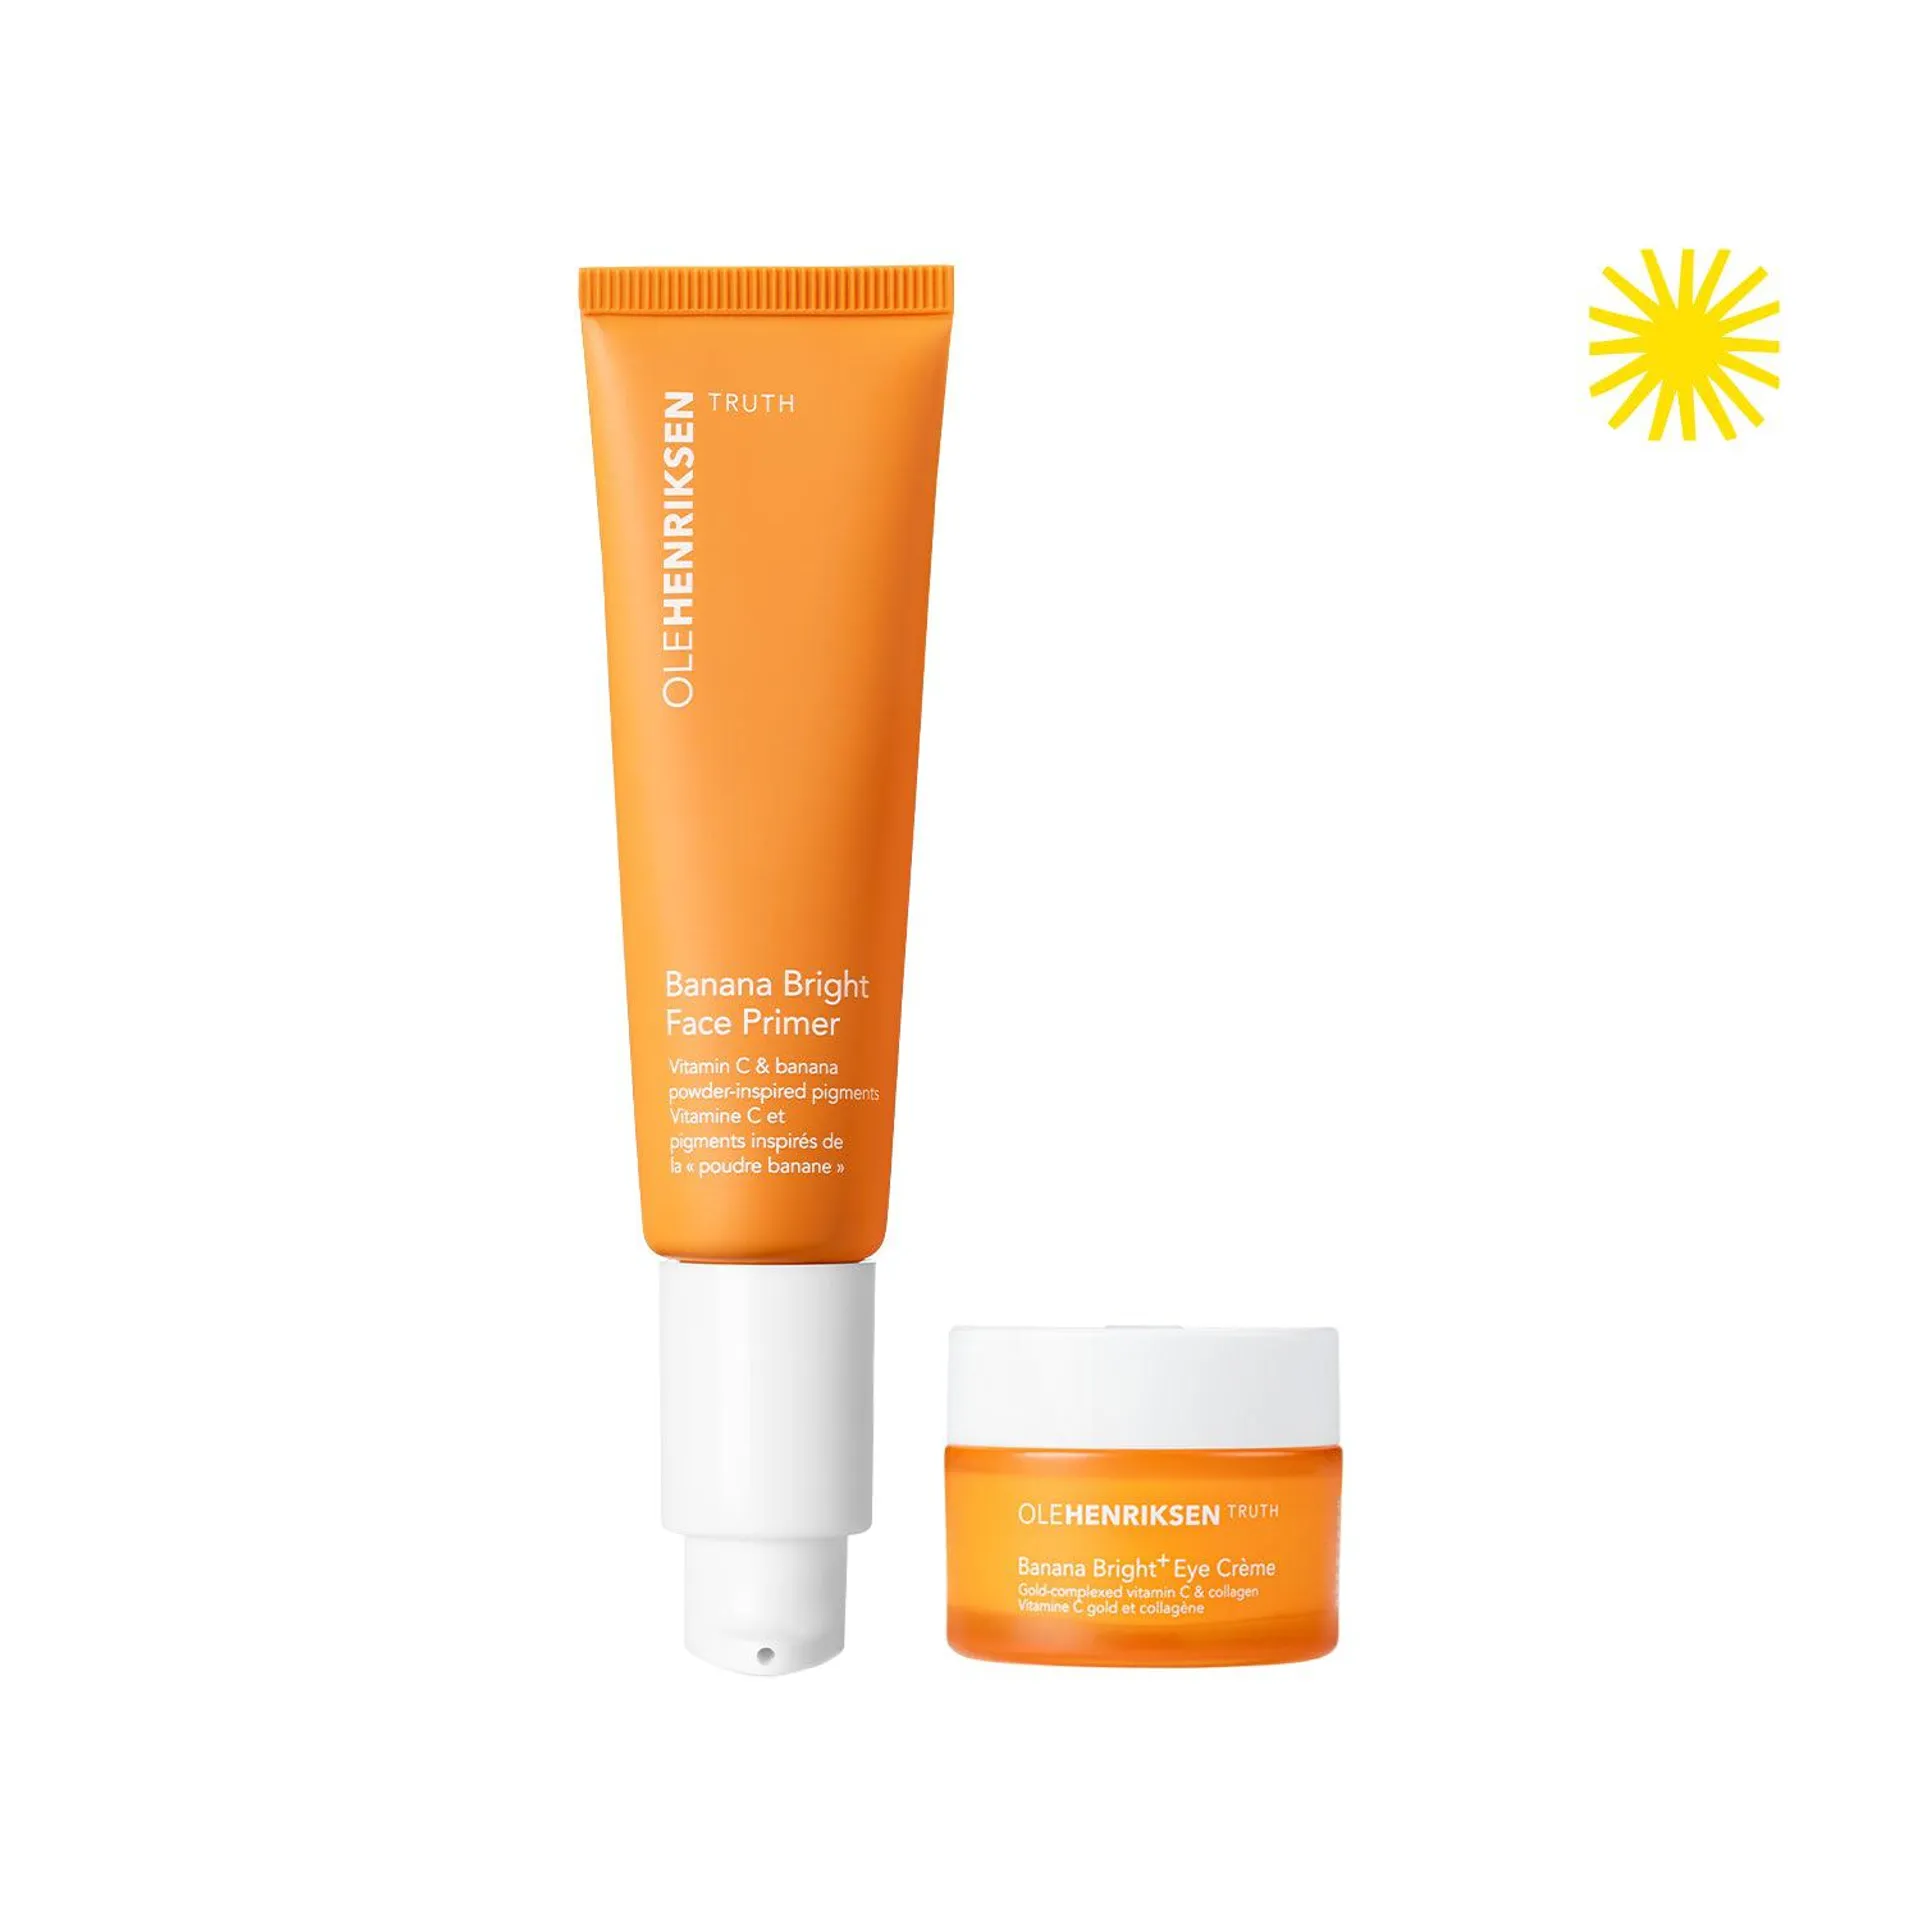 GFH (Glow from Home) Vitamin C Duo